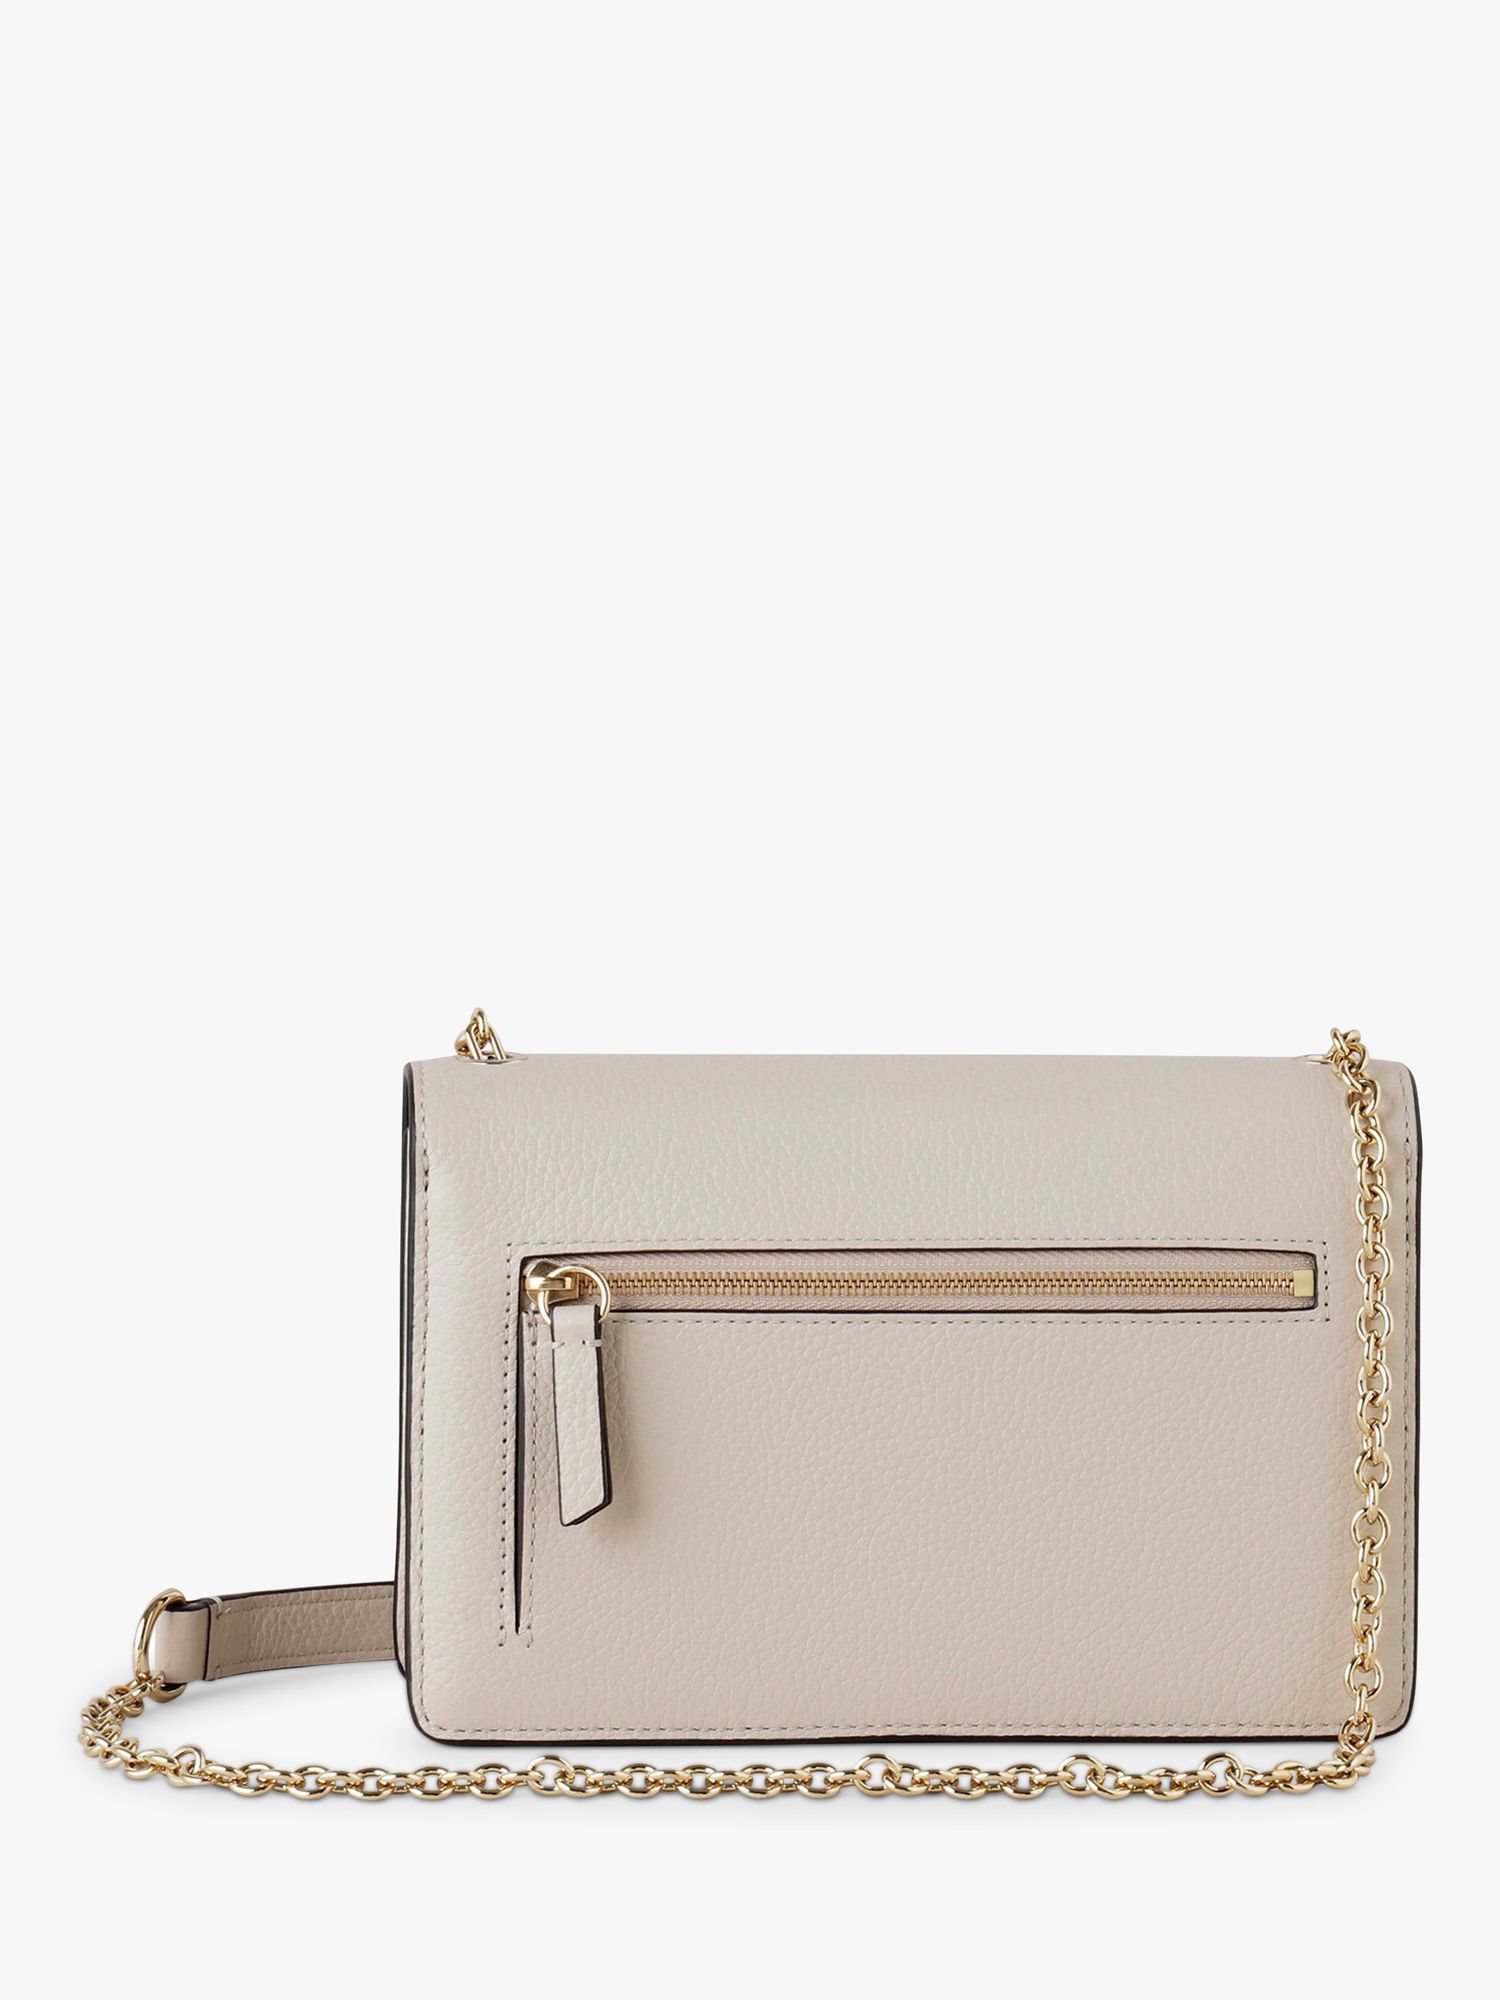 Mulberry Small Darley Small Classic Grain Leather Clutch Bag, Chalk at ...